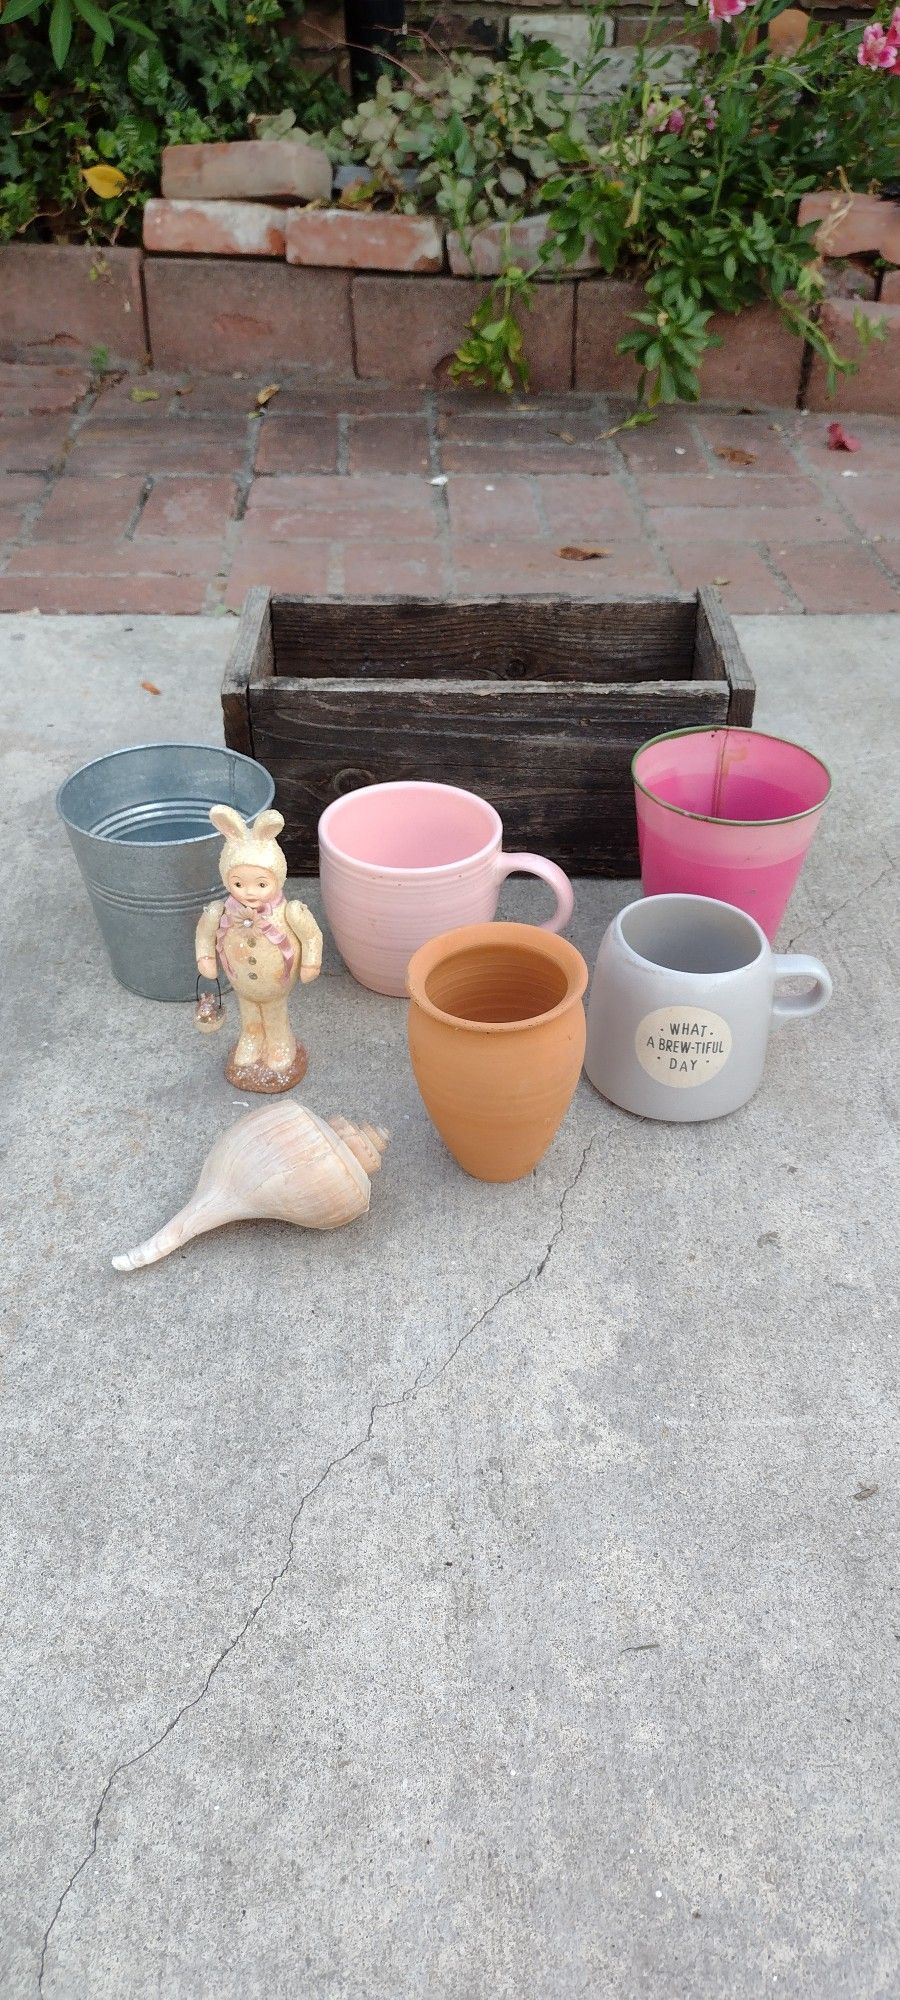 Pots, Cups, She'll, Bunny Doll with Moving Arms